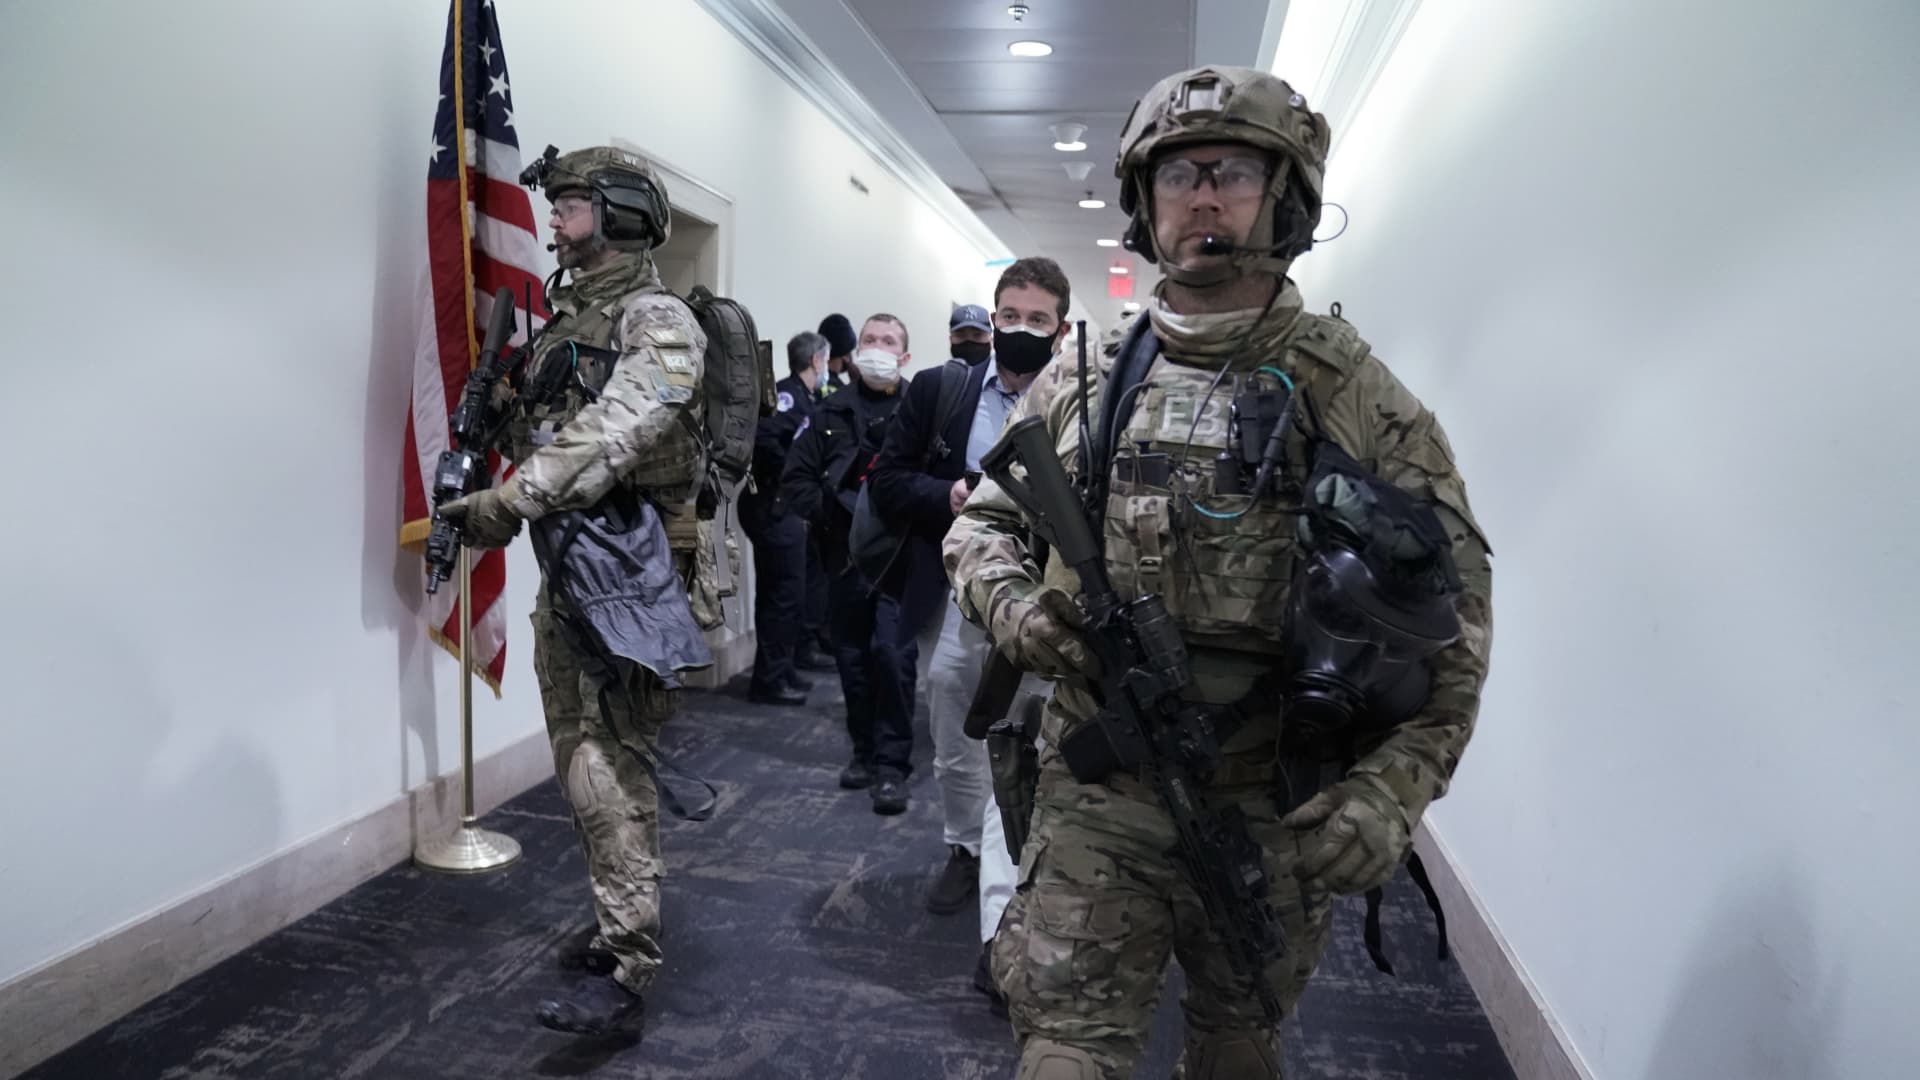 Members of the Federal Bureau of Investigation (FBI) swat team patrol the Longworth House Office building after a joint session of Congress to count the votes of the 2020 presidential election took place in Washington, D.C., U.S., on Wednesday, Jan. 6, 2021.